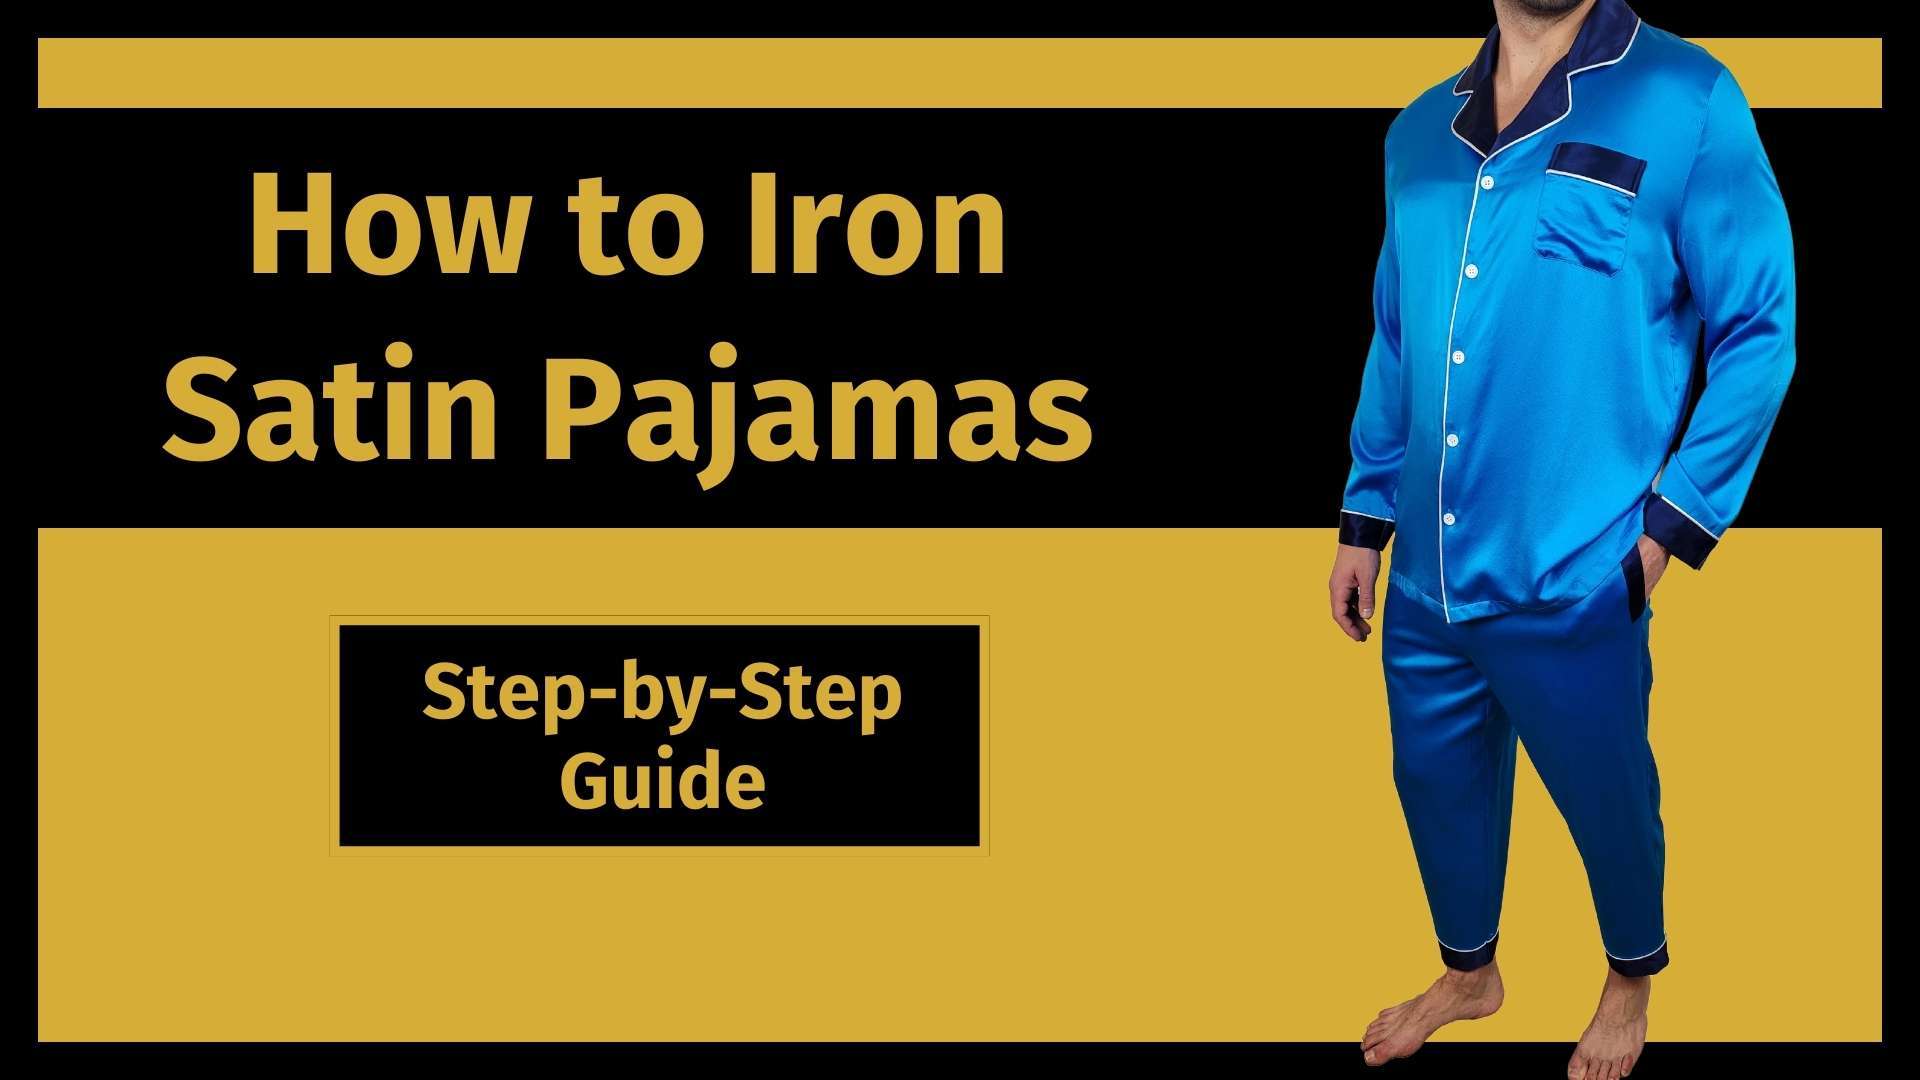 how to iron satin pajamas banner image with a picture of a man wearing a blue satin pajama set